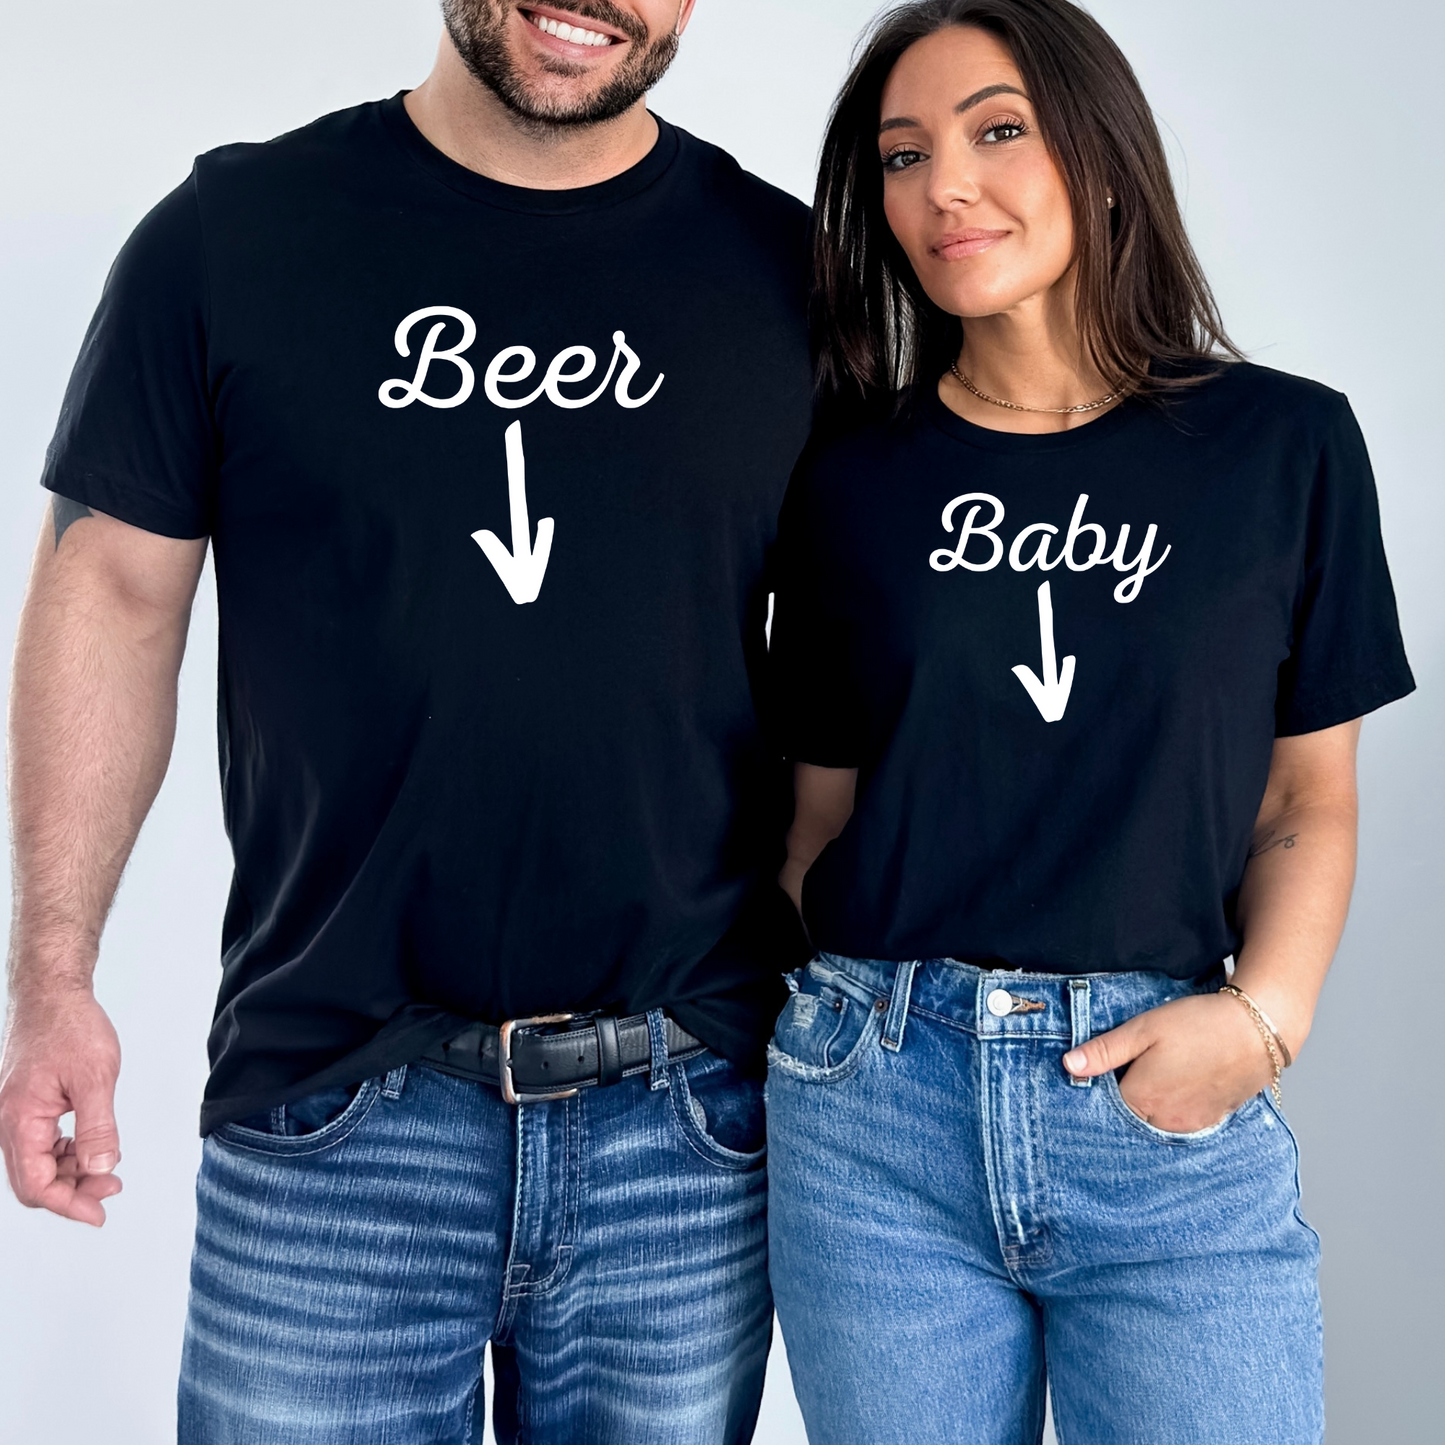 Funny Pregnancy Couple T-shirts - Beer Belly and Baby Belly